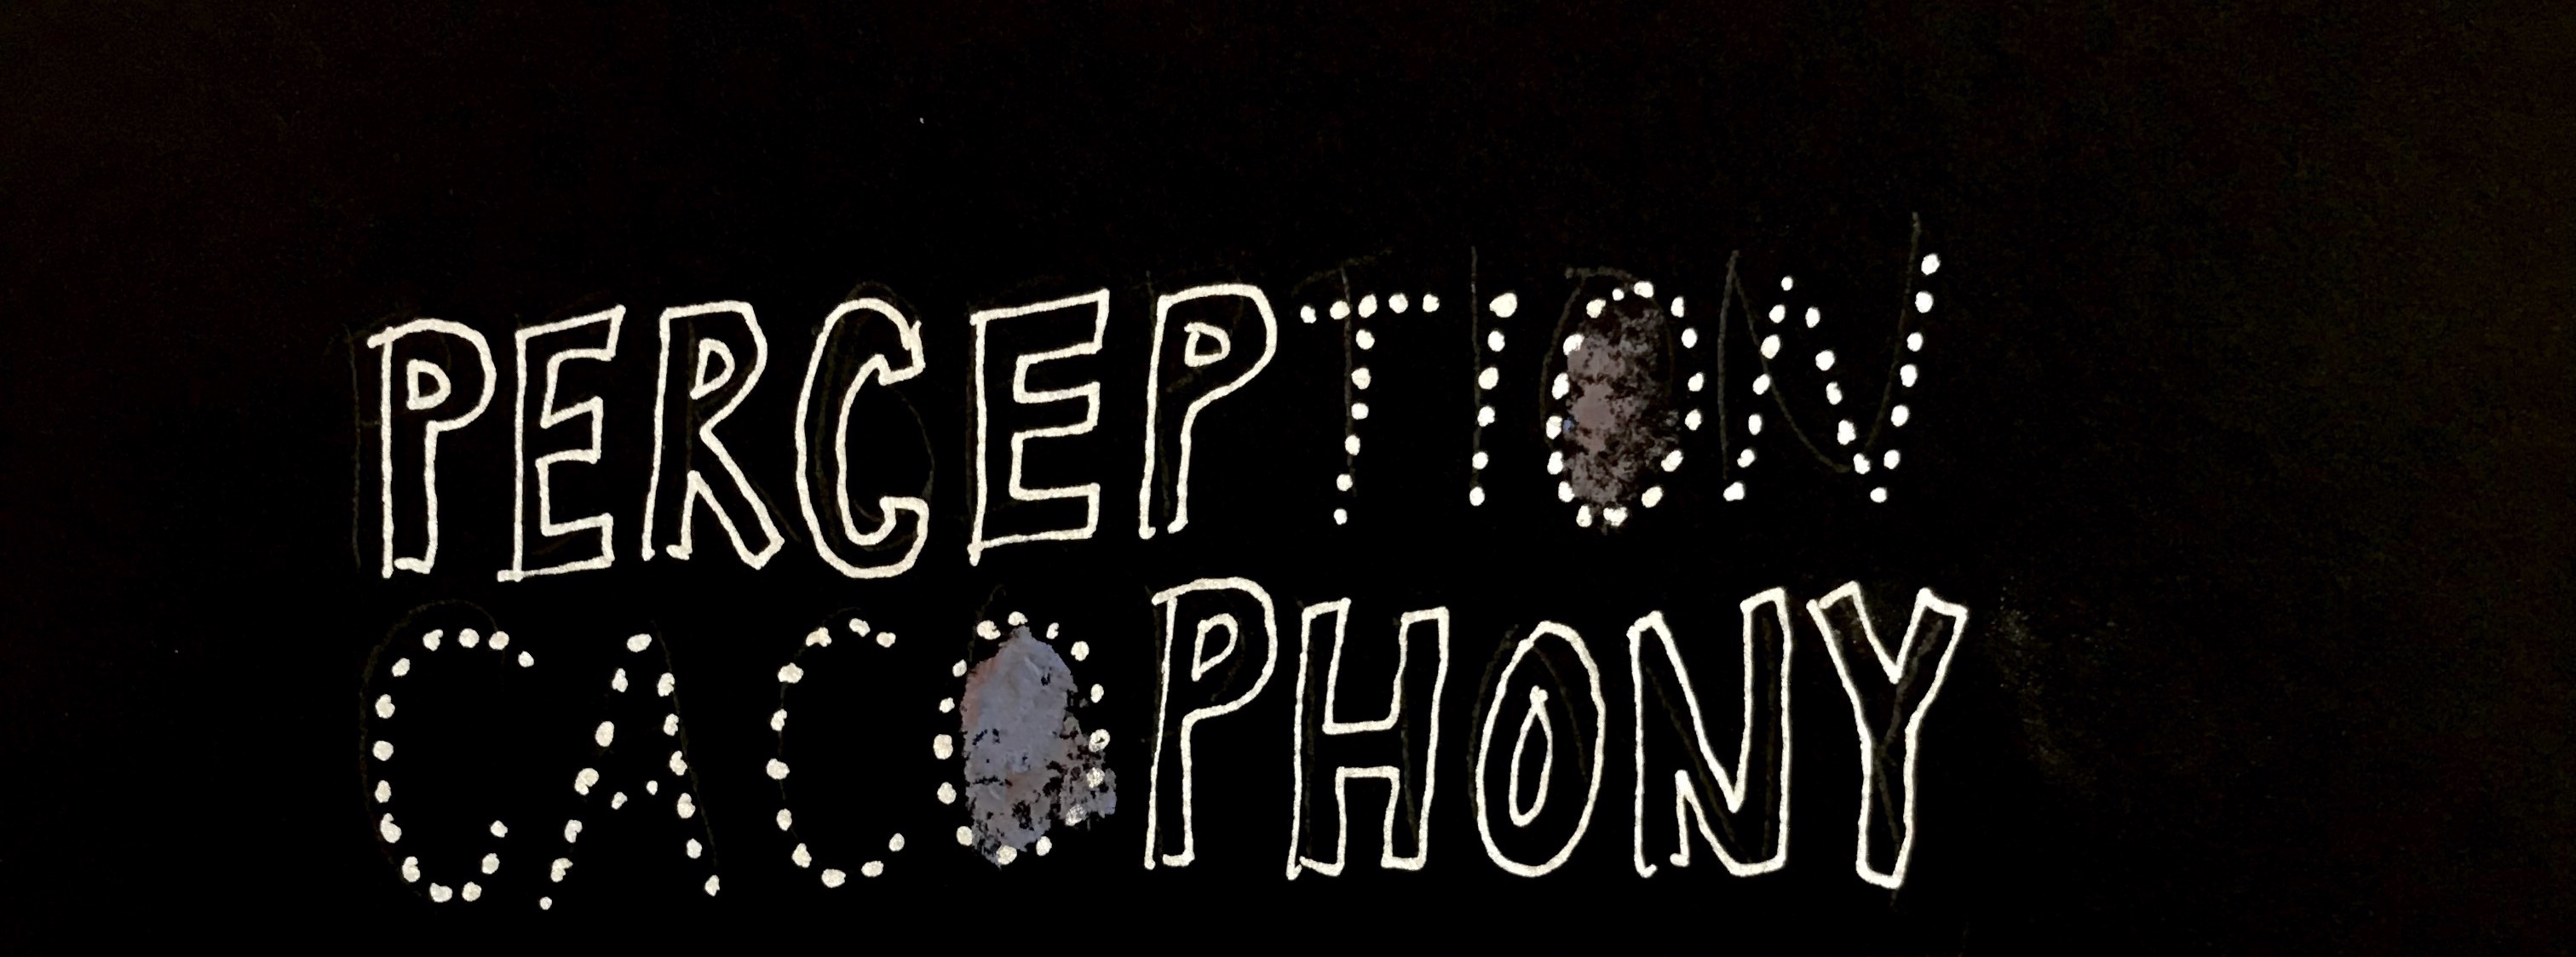 perception cacophony (hades & persephone) header homepage